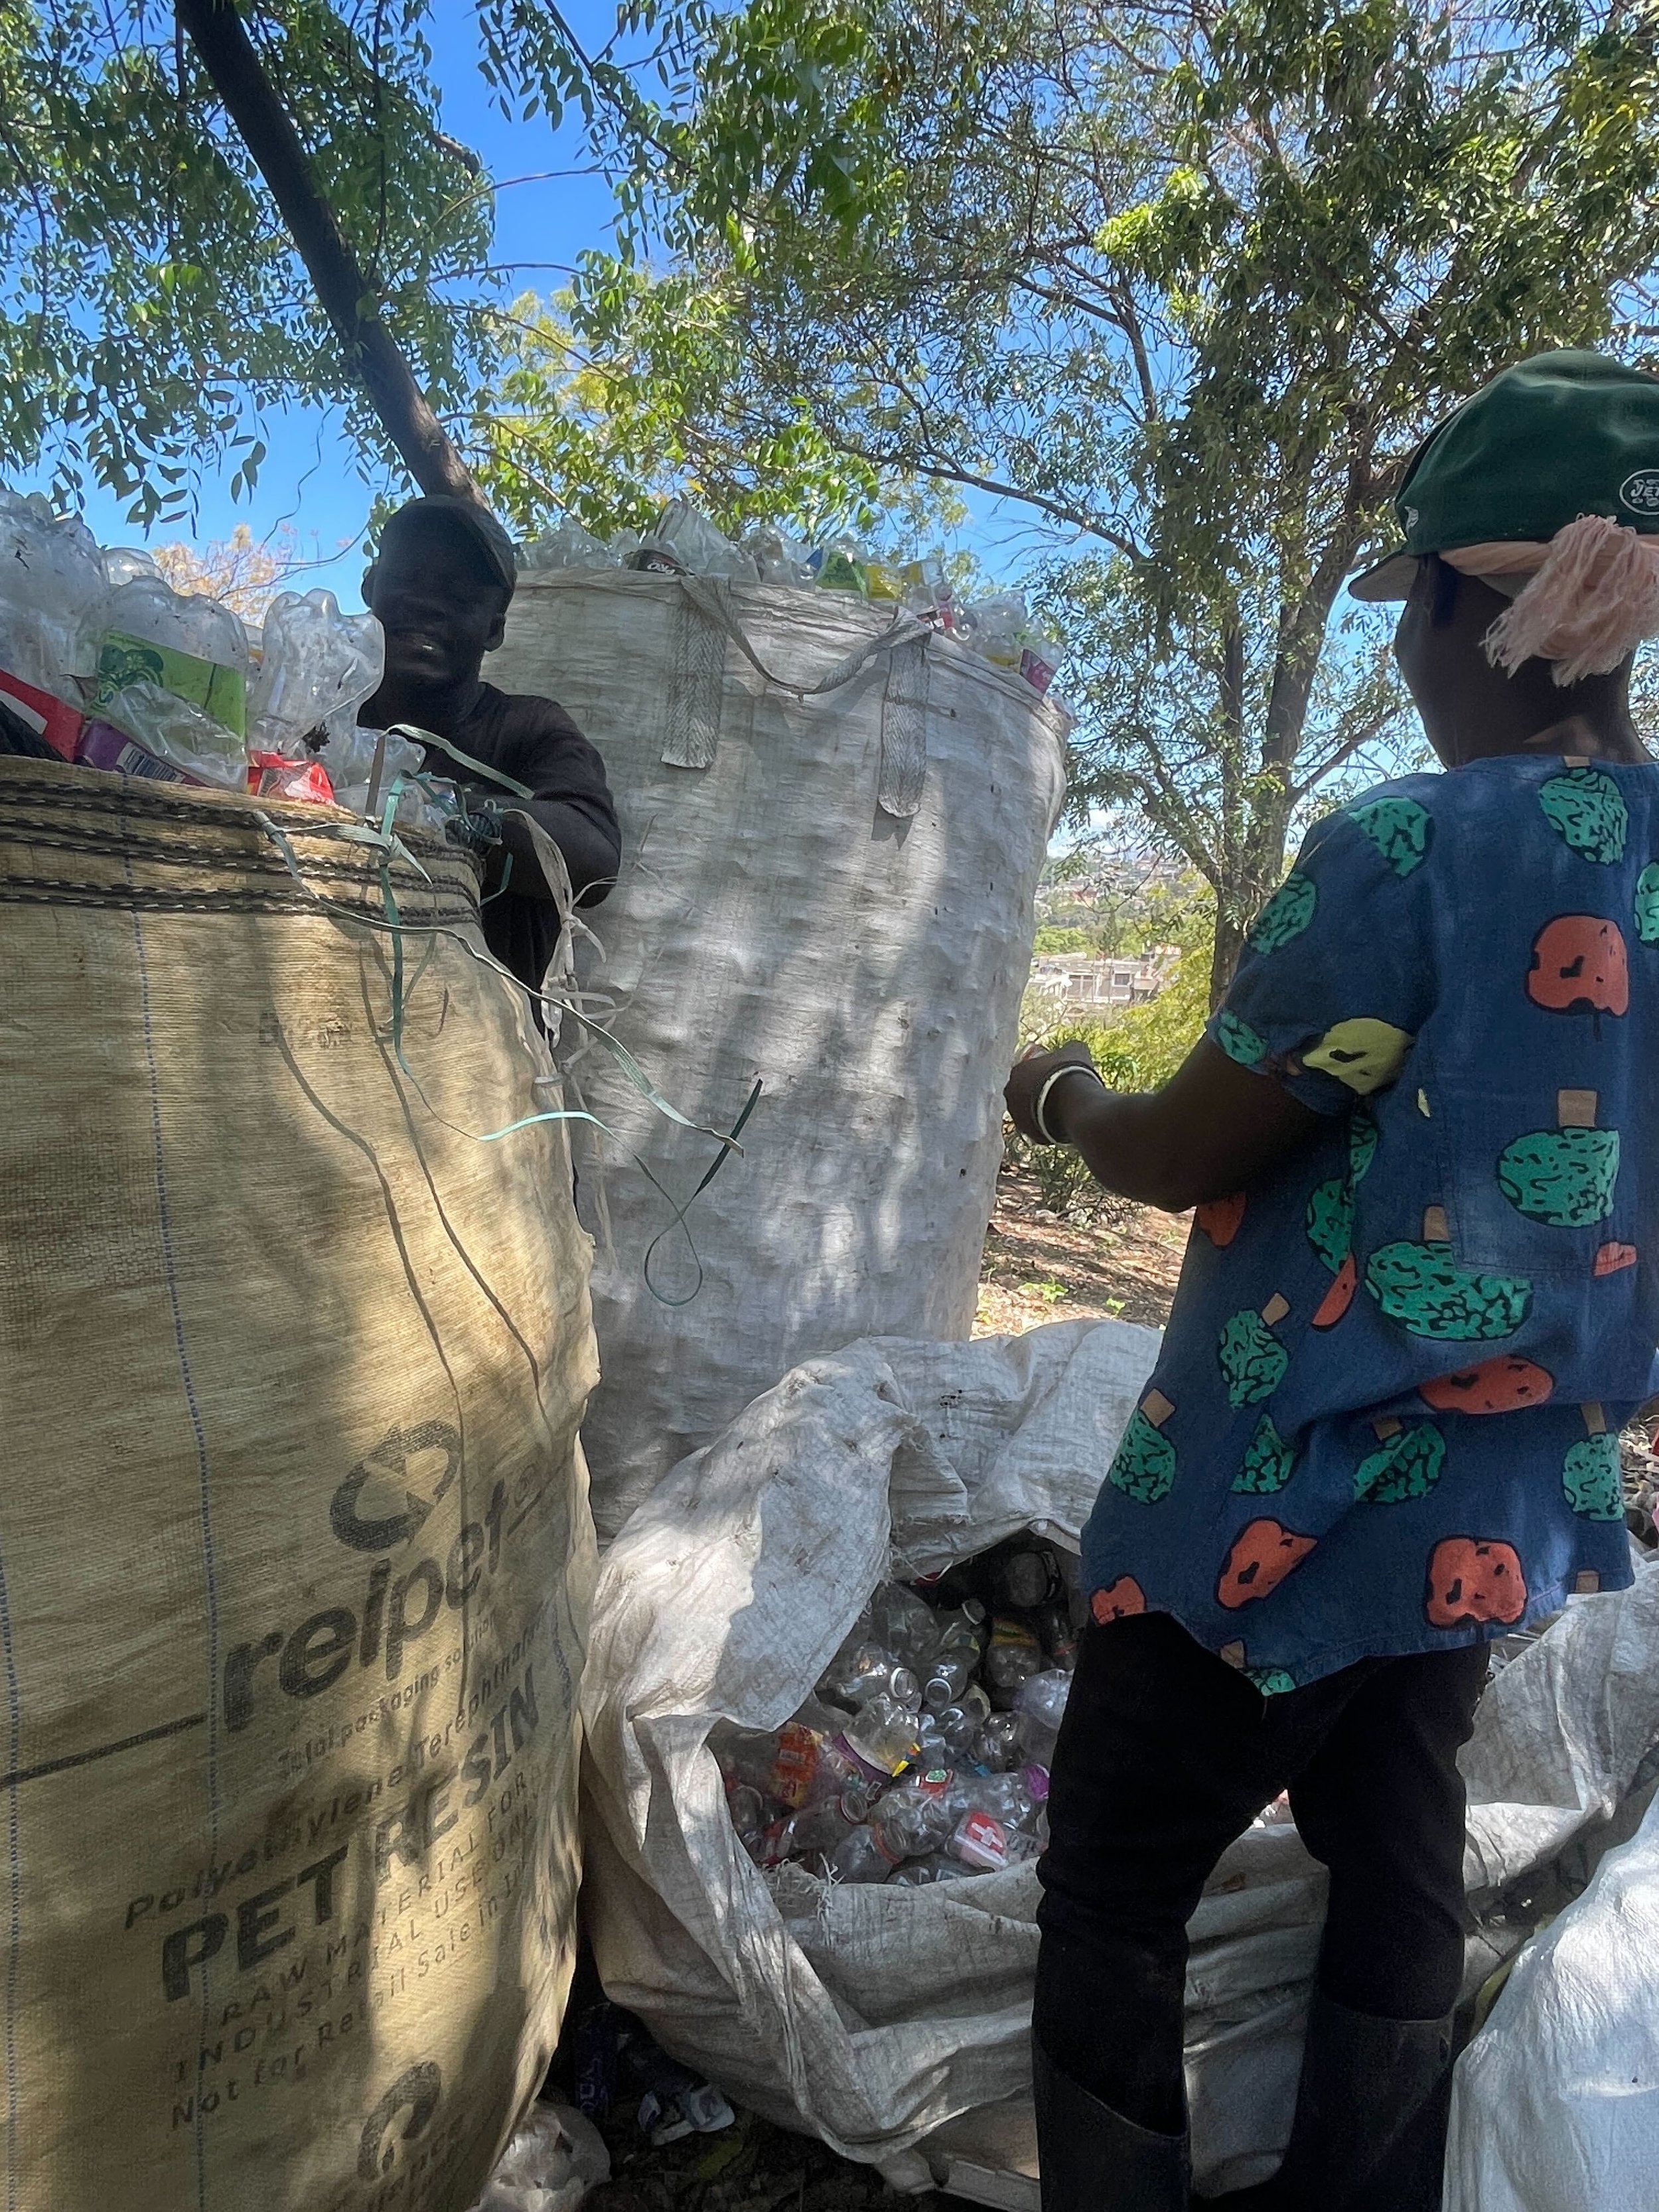  Here are two center employees filling a super sack for transport to our recycling partner. This means they’ll get paid for the material and the center can purchase more material from their collectors.  